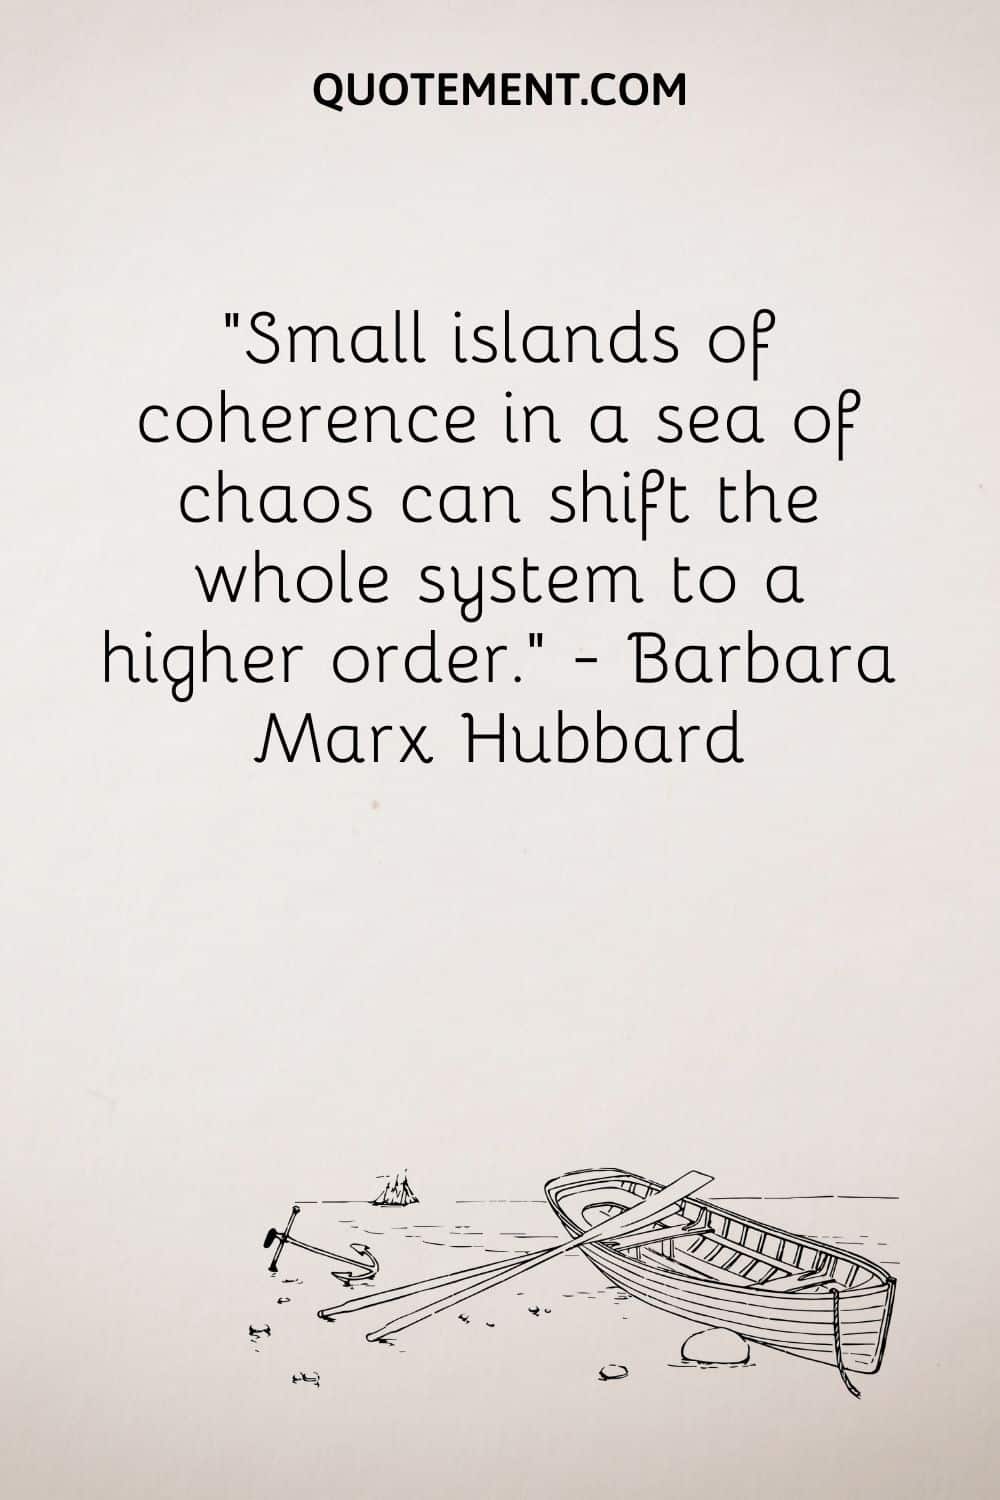 Small islands of coherence in a sea of chaos can shift the whole system to a higher order. — Barbara Marx Hubbard